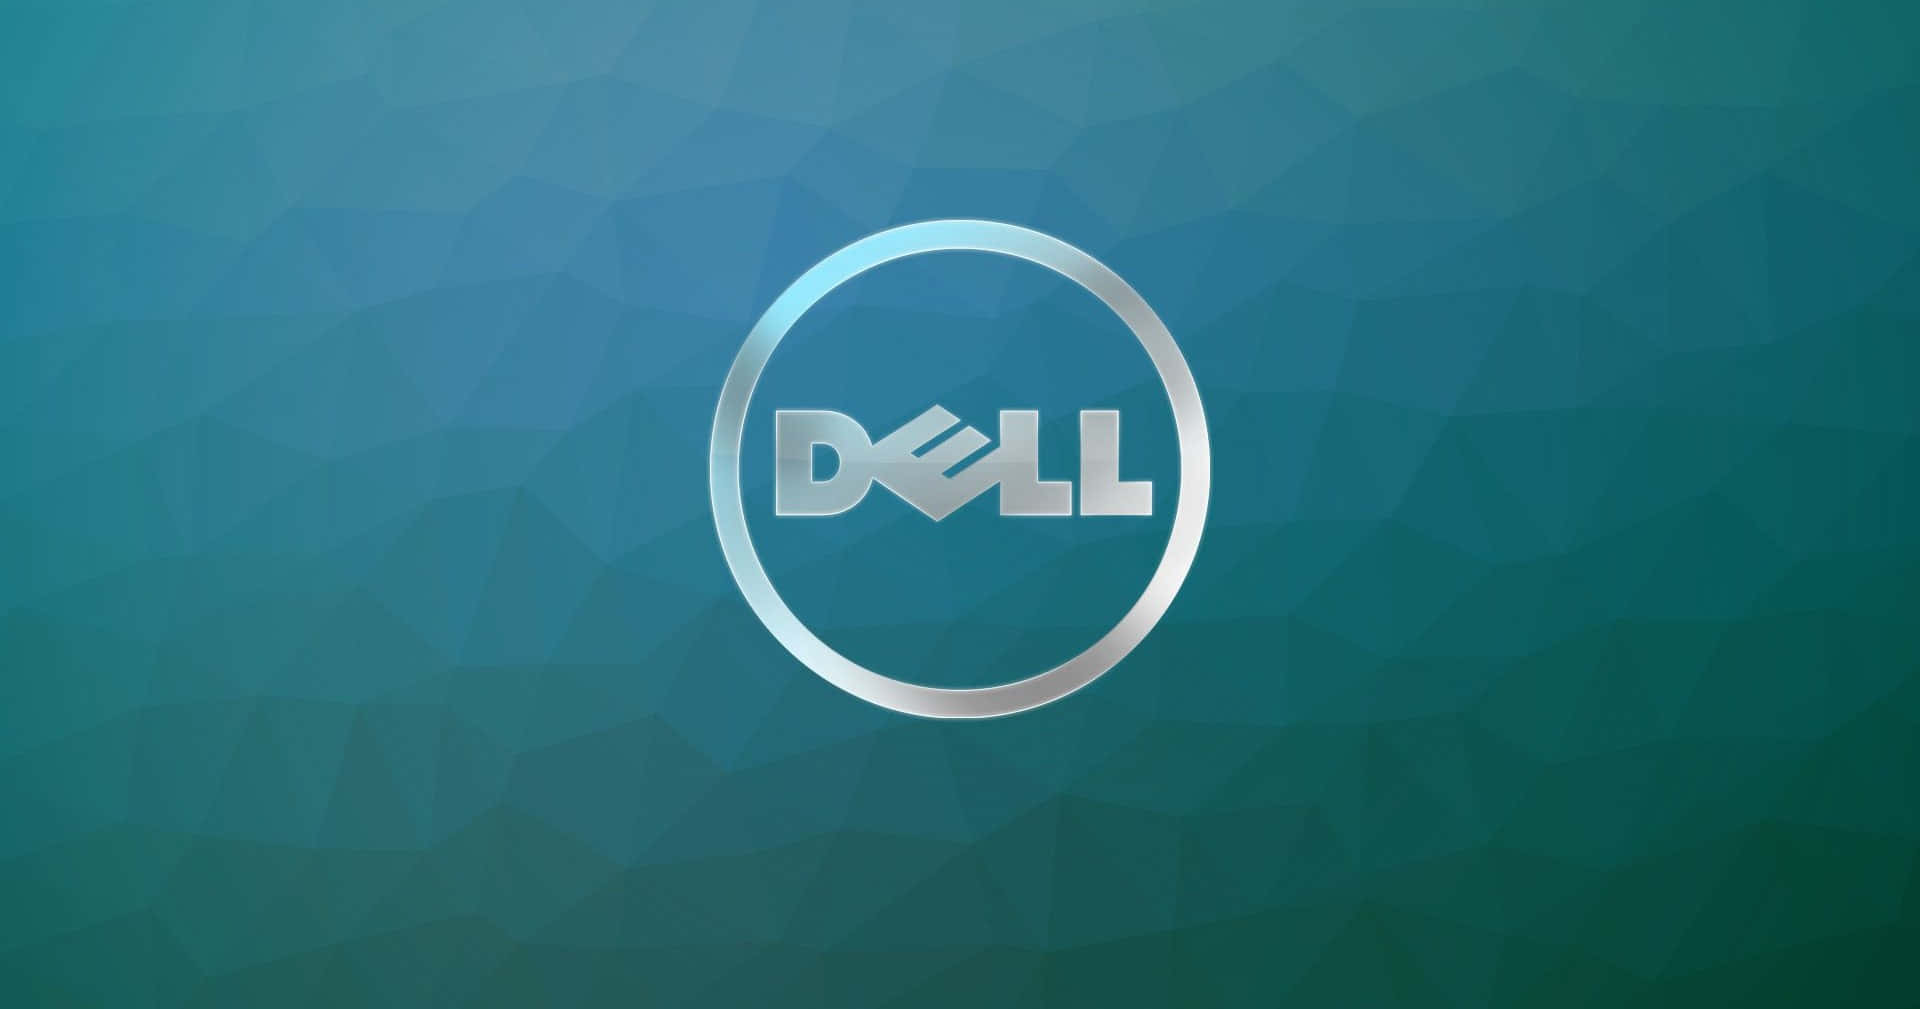 Faster&Smarter: Dell Technology for Your Needs